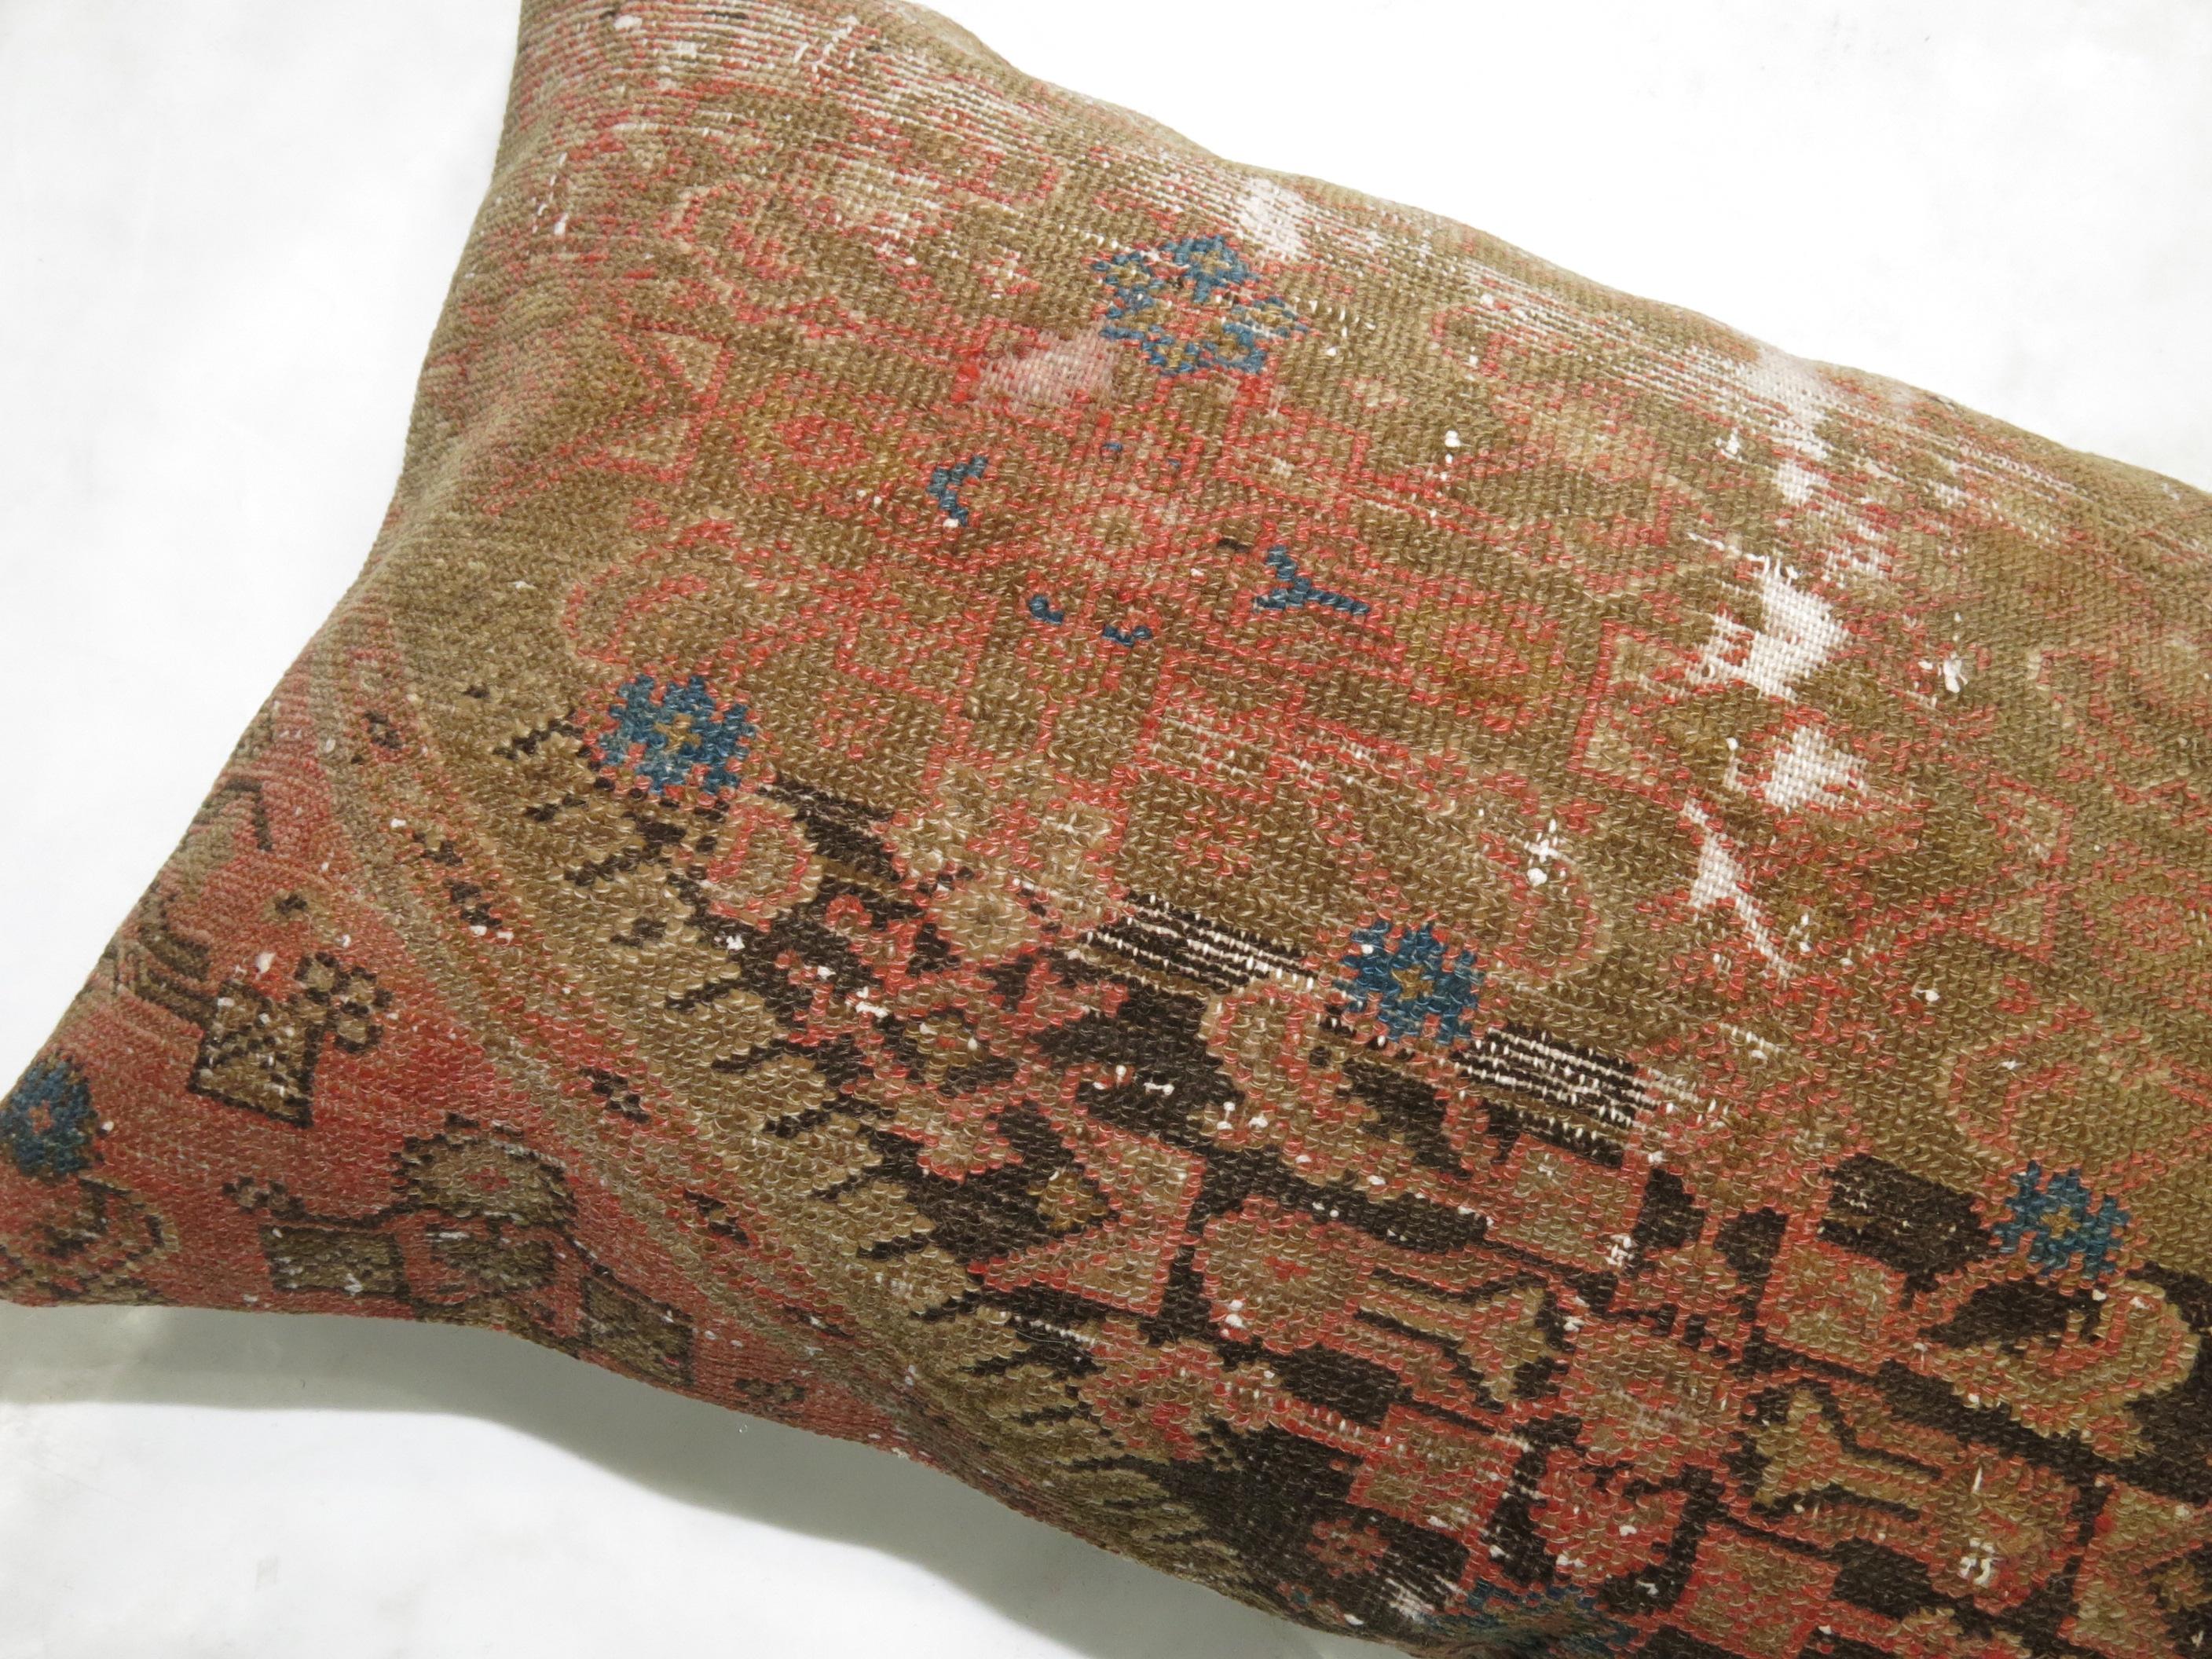 Pillow made from antique Persian Malayer rug with cotton back.

16'' x 23''